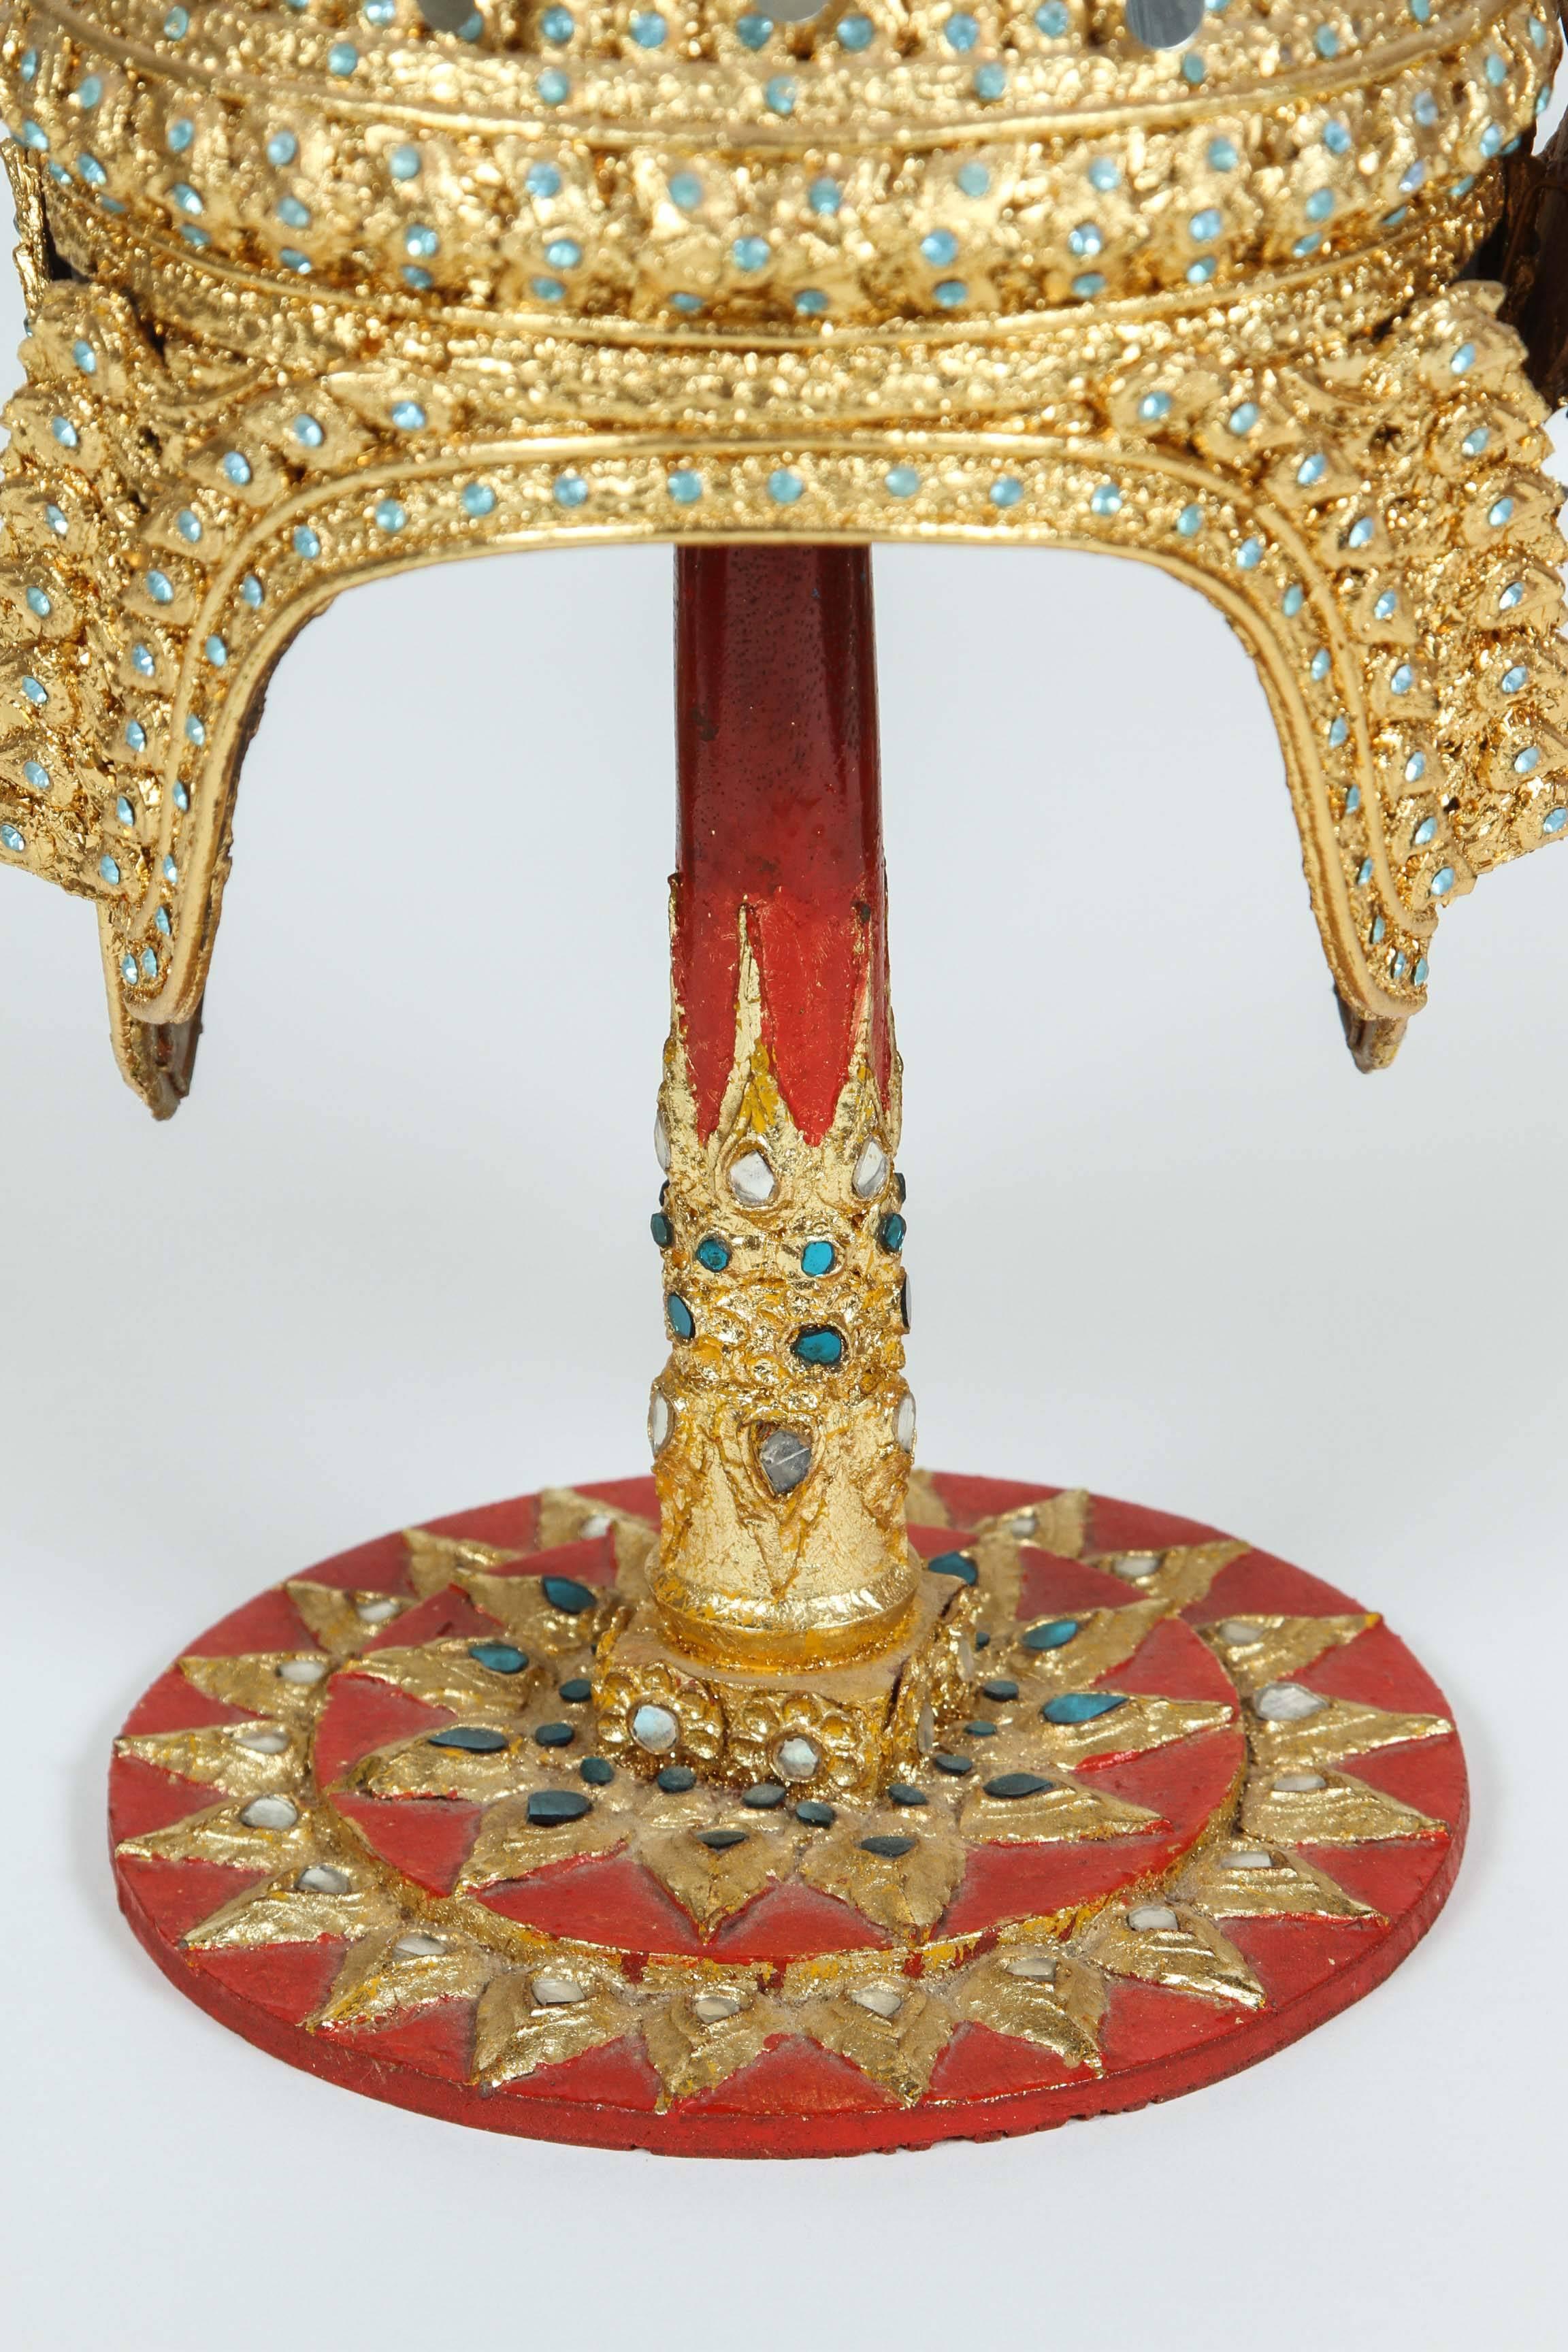 Hand-Crafted Gilt Ceremonial Thai Headdress on Stand